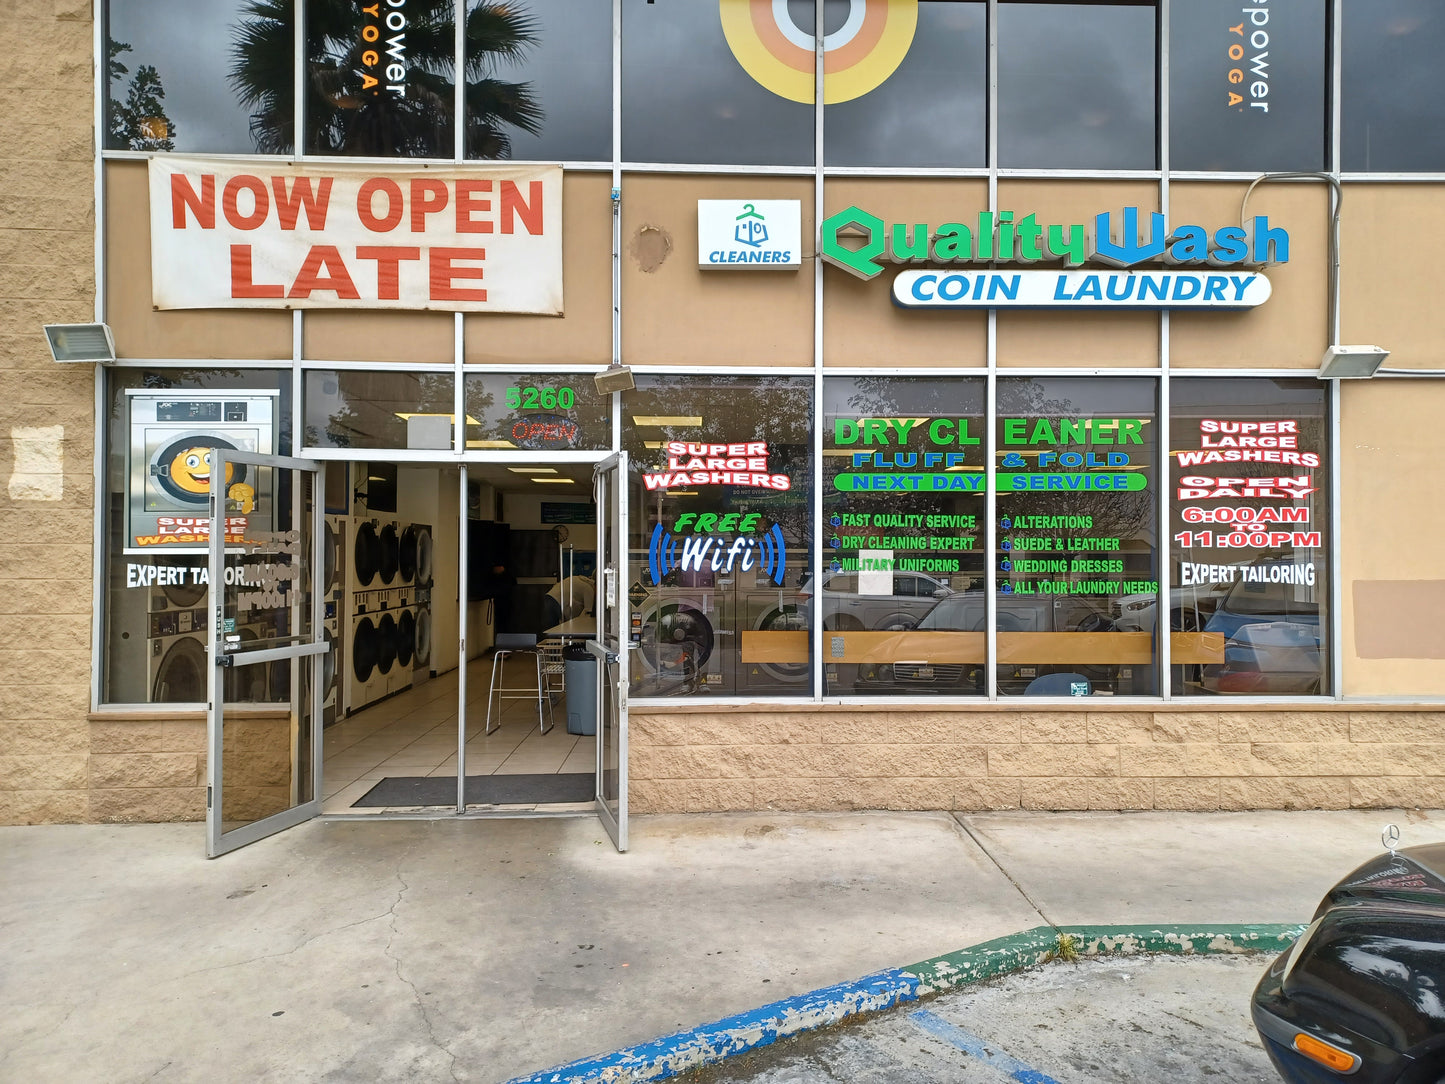 Garment Dry Cleaning Services at Baltimore Drive